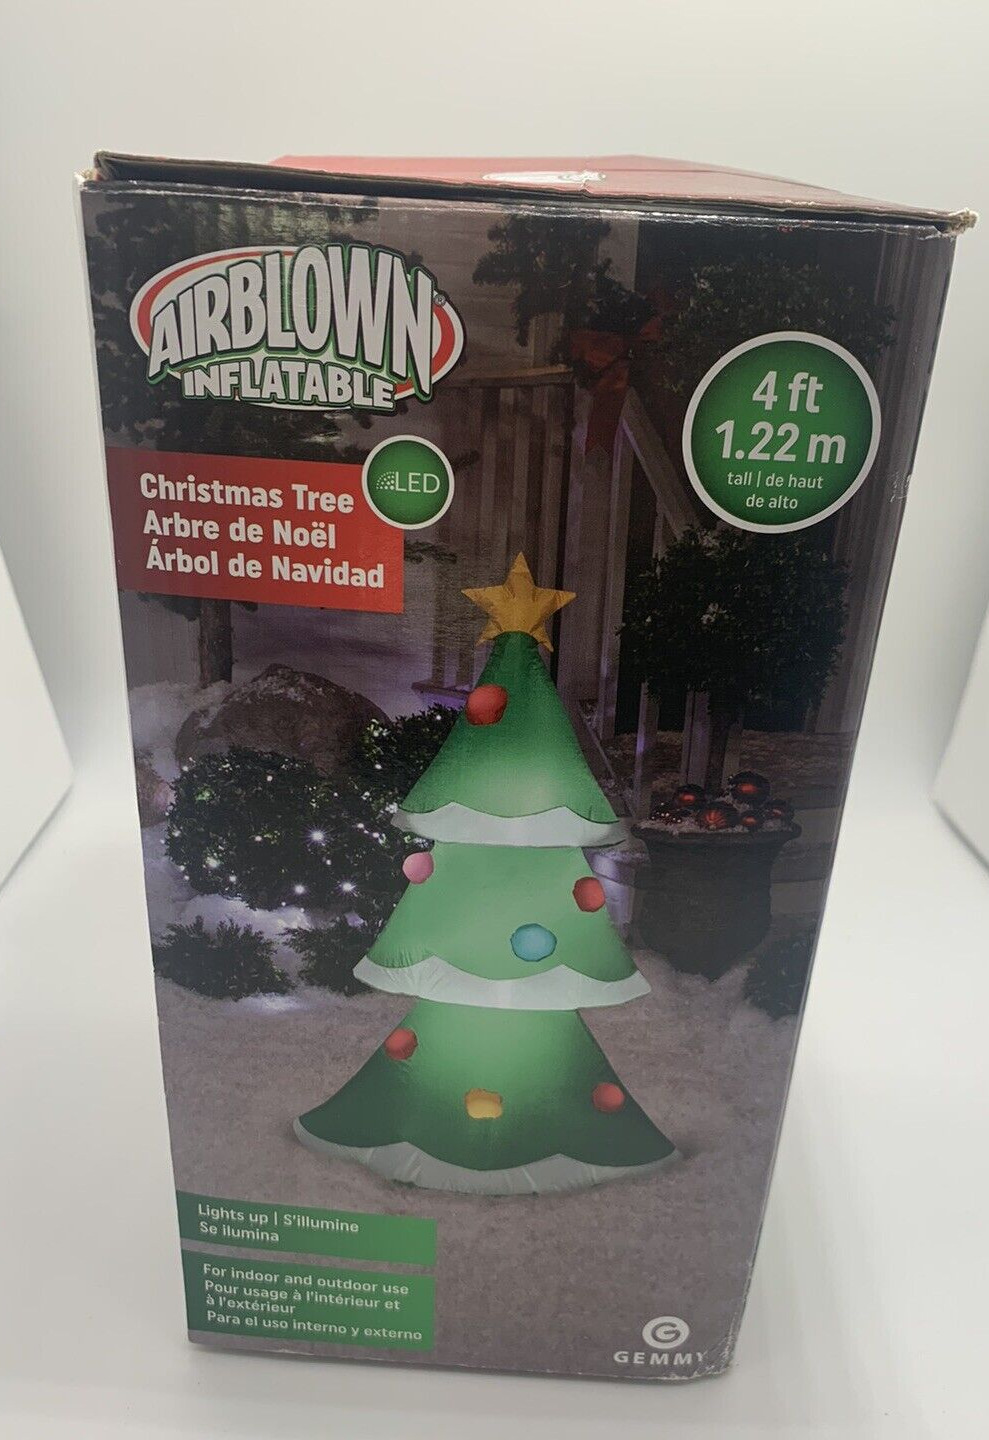 Gemmy Airblown Inflatable 4ft Lighted Christmas Tree #1292357 Green Open Box